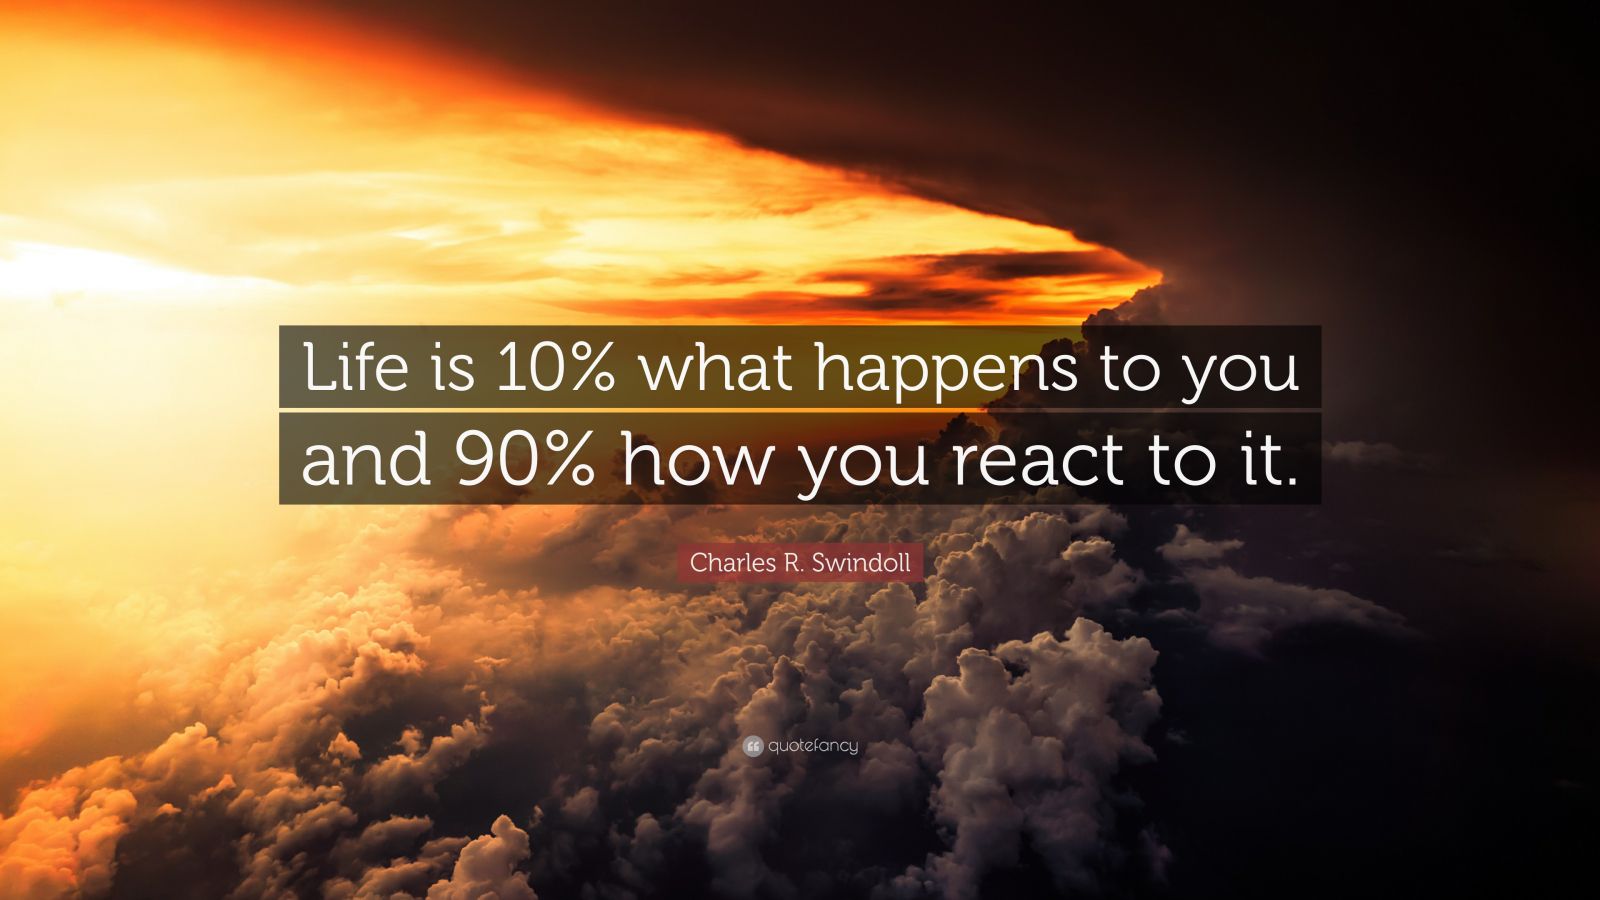 6361631 Charles R Swindoll Quote Life is 10 what happens to you and 90 how